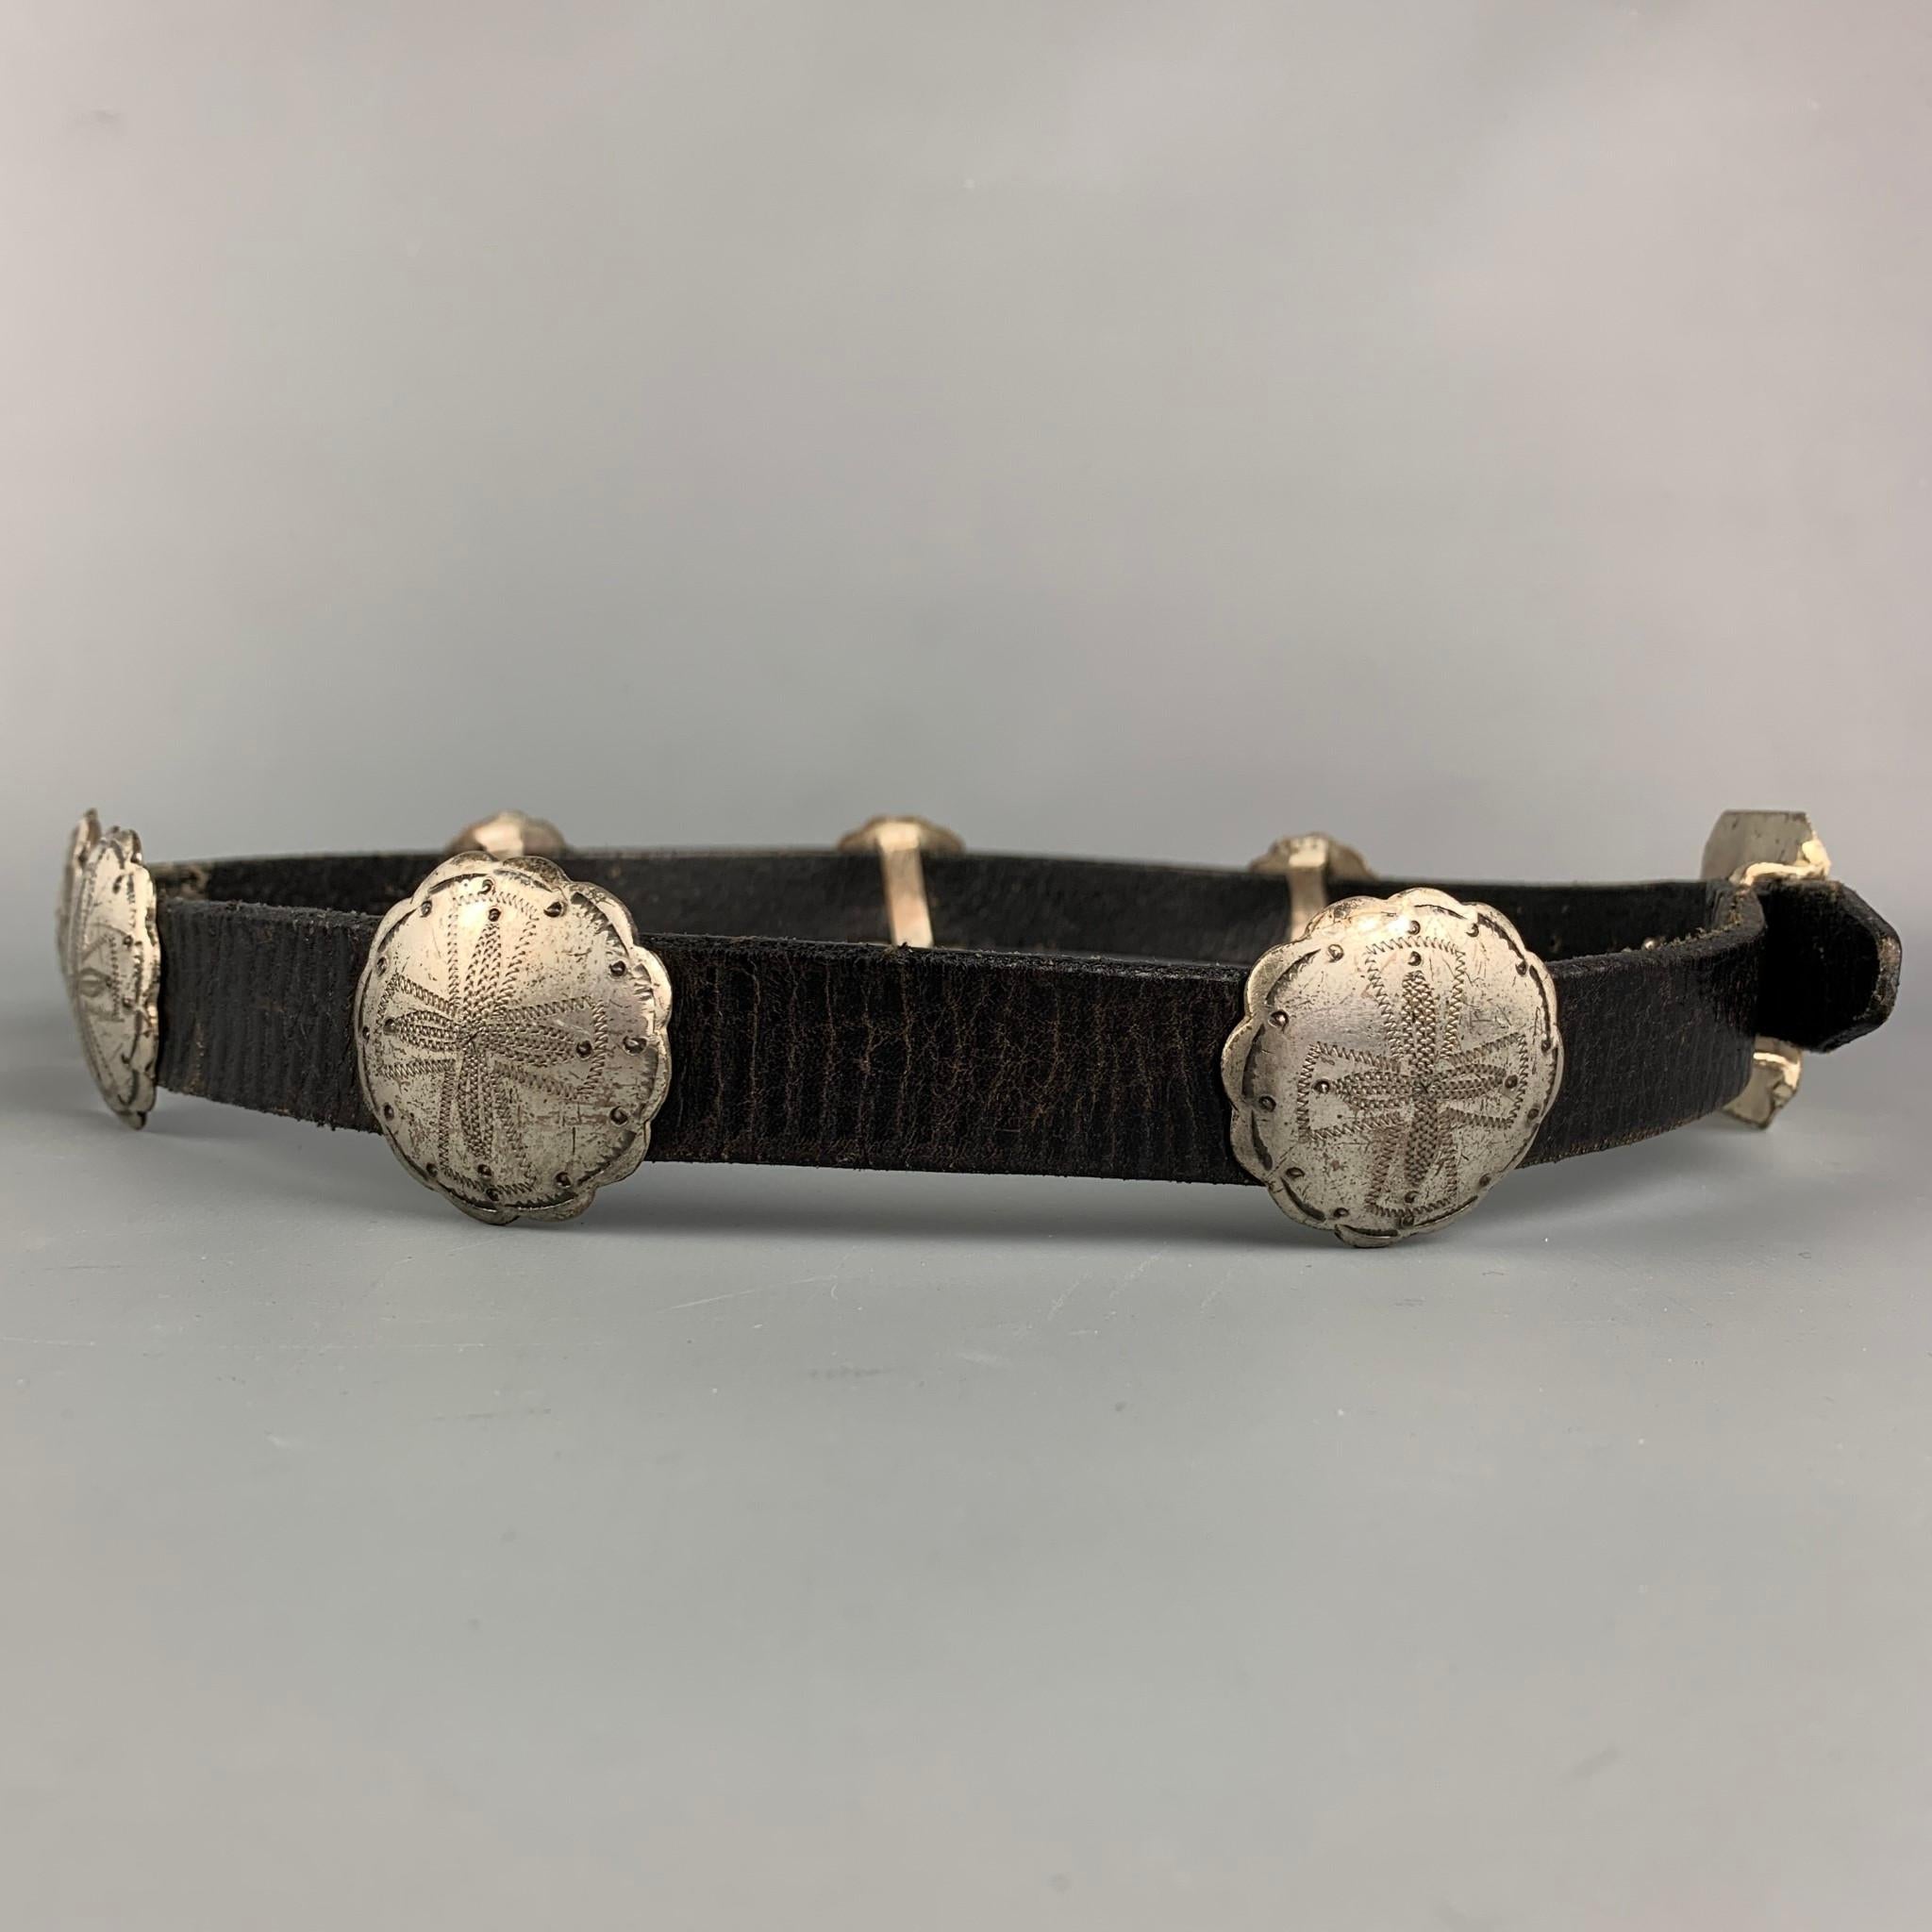 RALPH LAUREN belt comes in a black leather featuring silver tone concho accents and a artful concho buckle.

Good Pre-Owned Condition.
Marked: L

Length: 42 in.
Width: 1.25 in.
Fits: 32.5 in. - 36.5 in.
Buckle: 2.5 in. 